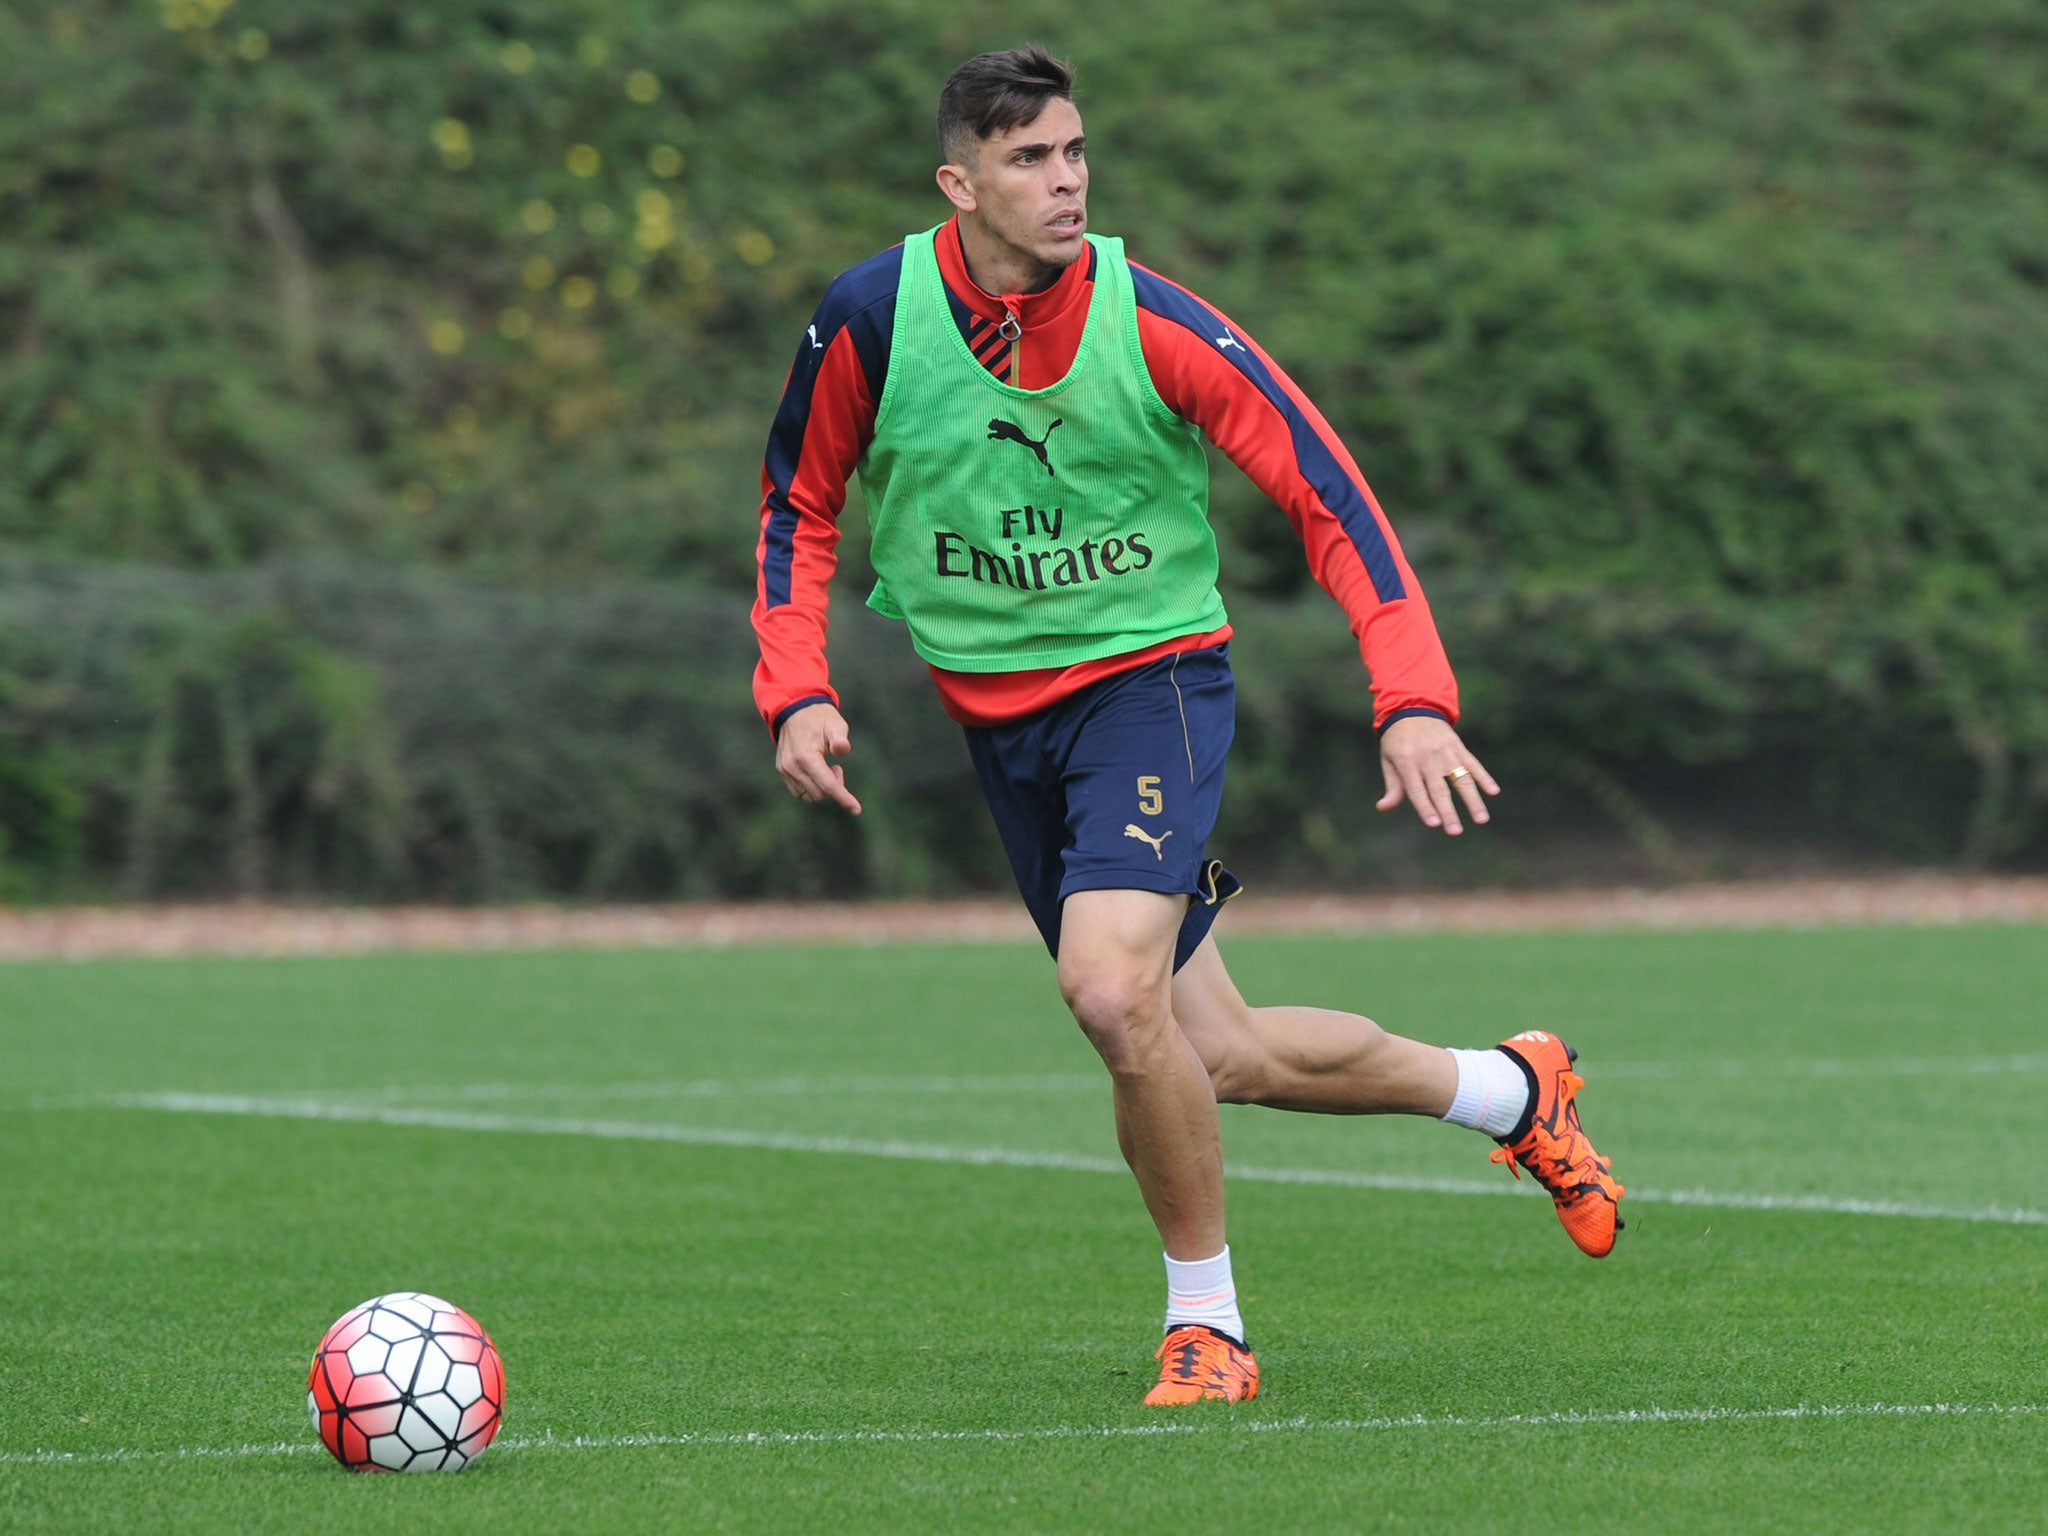 Arsenal have not conceded when Gabriel Paulista has played in the Premier League